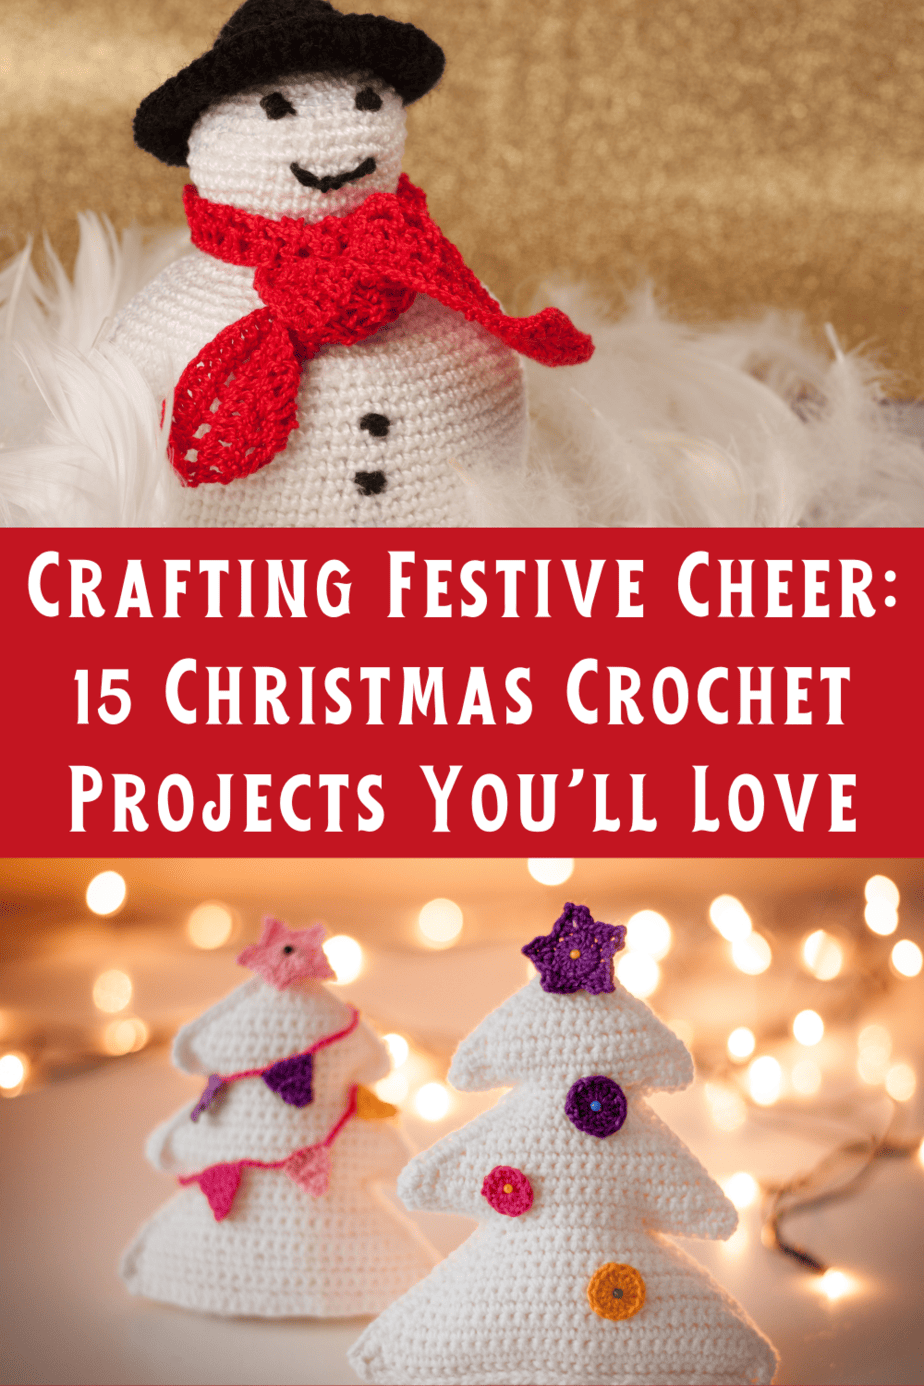 Christmas Crochet Projects - Festive Patterns for the Holiday Season